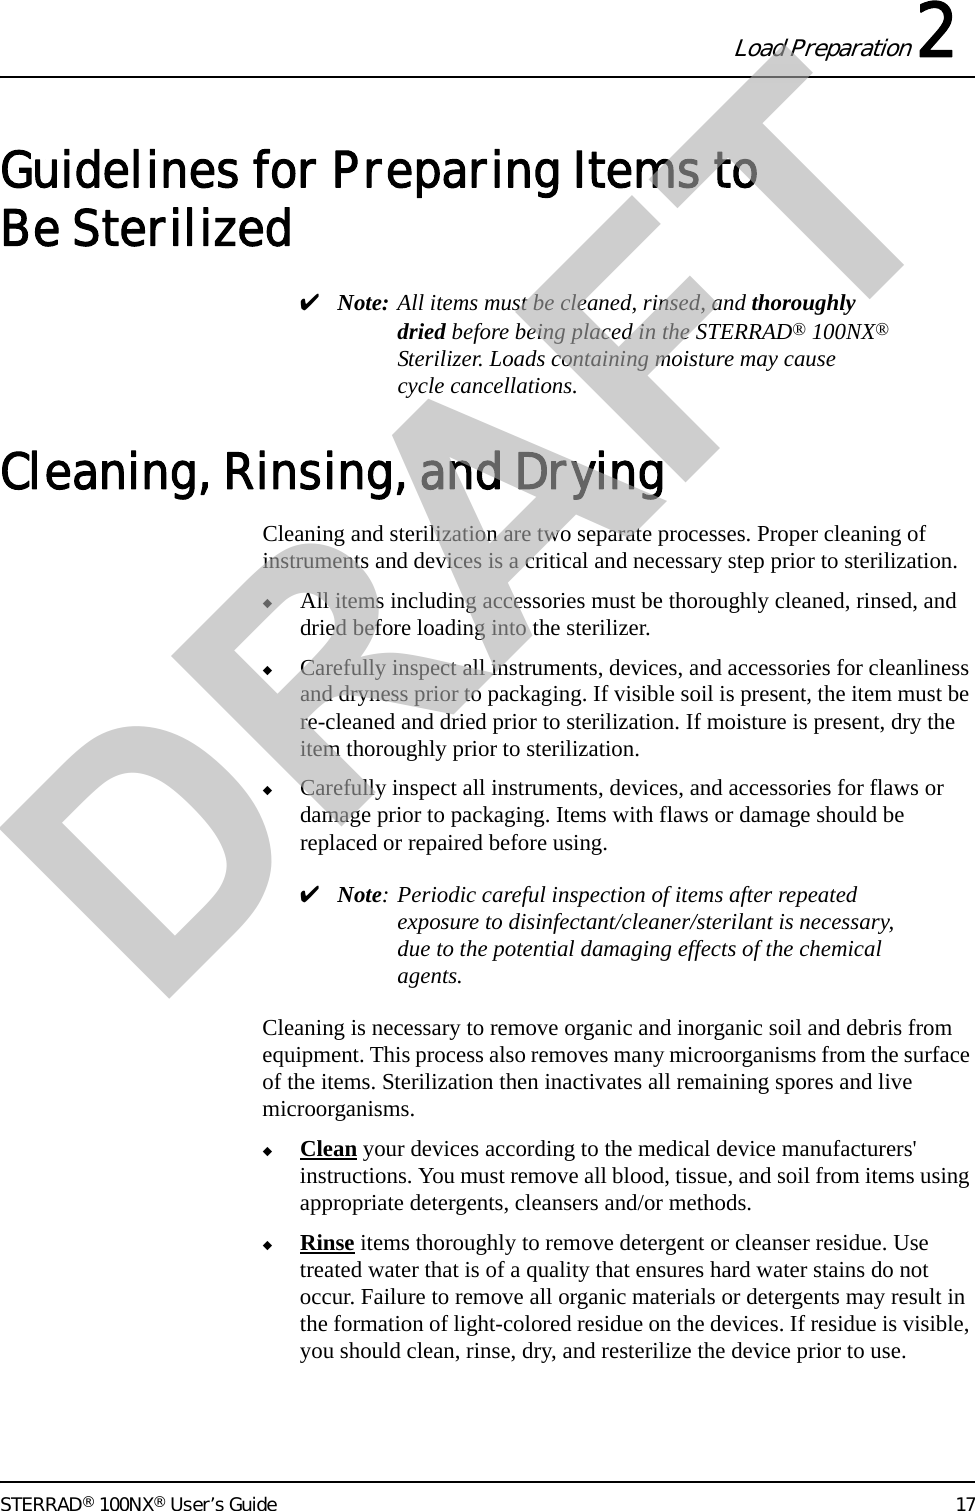 Load Preparation 2STERRAD® 100NX® User’s Guide 17Guidelines for Preparing Items to Be Sterilized✔Note: All items must be cleaned, rinsed, and thoroughly dried before being placed in the STERRAD® 100NX® Sterilizer. Loads containing moisture may cause cycle cancellations.Cleaning, Rinsing, and DryingCleaning and sterilization are two separate processes. Proper cleaning of instruments and devices is a critical and necessary step prior to sterilization.◆All items including accessories must be thoroughly cleaned, rinsed, and dried before loading into the sterilizer. ◆Carefully inspect all instruments, devices, and accessories for cleanliness and dryness prior to packaging. If visible soil is present, the item must be re-cleaned and dried prior to sterilization. If moisture is present, dry the item thoroughly prior to sterilization.◆Carefully inspect all instruments, devices, and accessories for flaws or damage prior to packaging. Items with flaws or damage should be replaced or repaired before using.✔Note: Periodic careful inspection of items after repeated exposure to disinfectant/cleaner/sterilant is necessary, due to the potential damaging effects of the chemical agents.Cleaning is necessary to remove organic and inorganic soil and debris from equipment. This process also removes many microorganisms from the surface of the items. Sterilization then inactivates all remaining spores and live microorganisms.◆Clean your devices according to the medical device manufacturers&apos; instructions. You must remove all blood, tissue, and soil from items using appropriate detergents, cleansers and/or methods. ◆Rinse items thoroughly to remove detergent or cleanser residue. Use treated water that is of a quality that ensures hard water stains do not occur. Failure to remove all organic materials or detergents may result in the formation of light-colored residue on the devices. If residue is visible, you should clean, rinse, dry, and resterilize the device prior to use.DRAFT